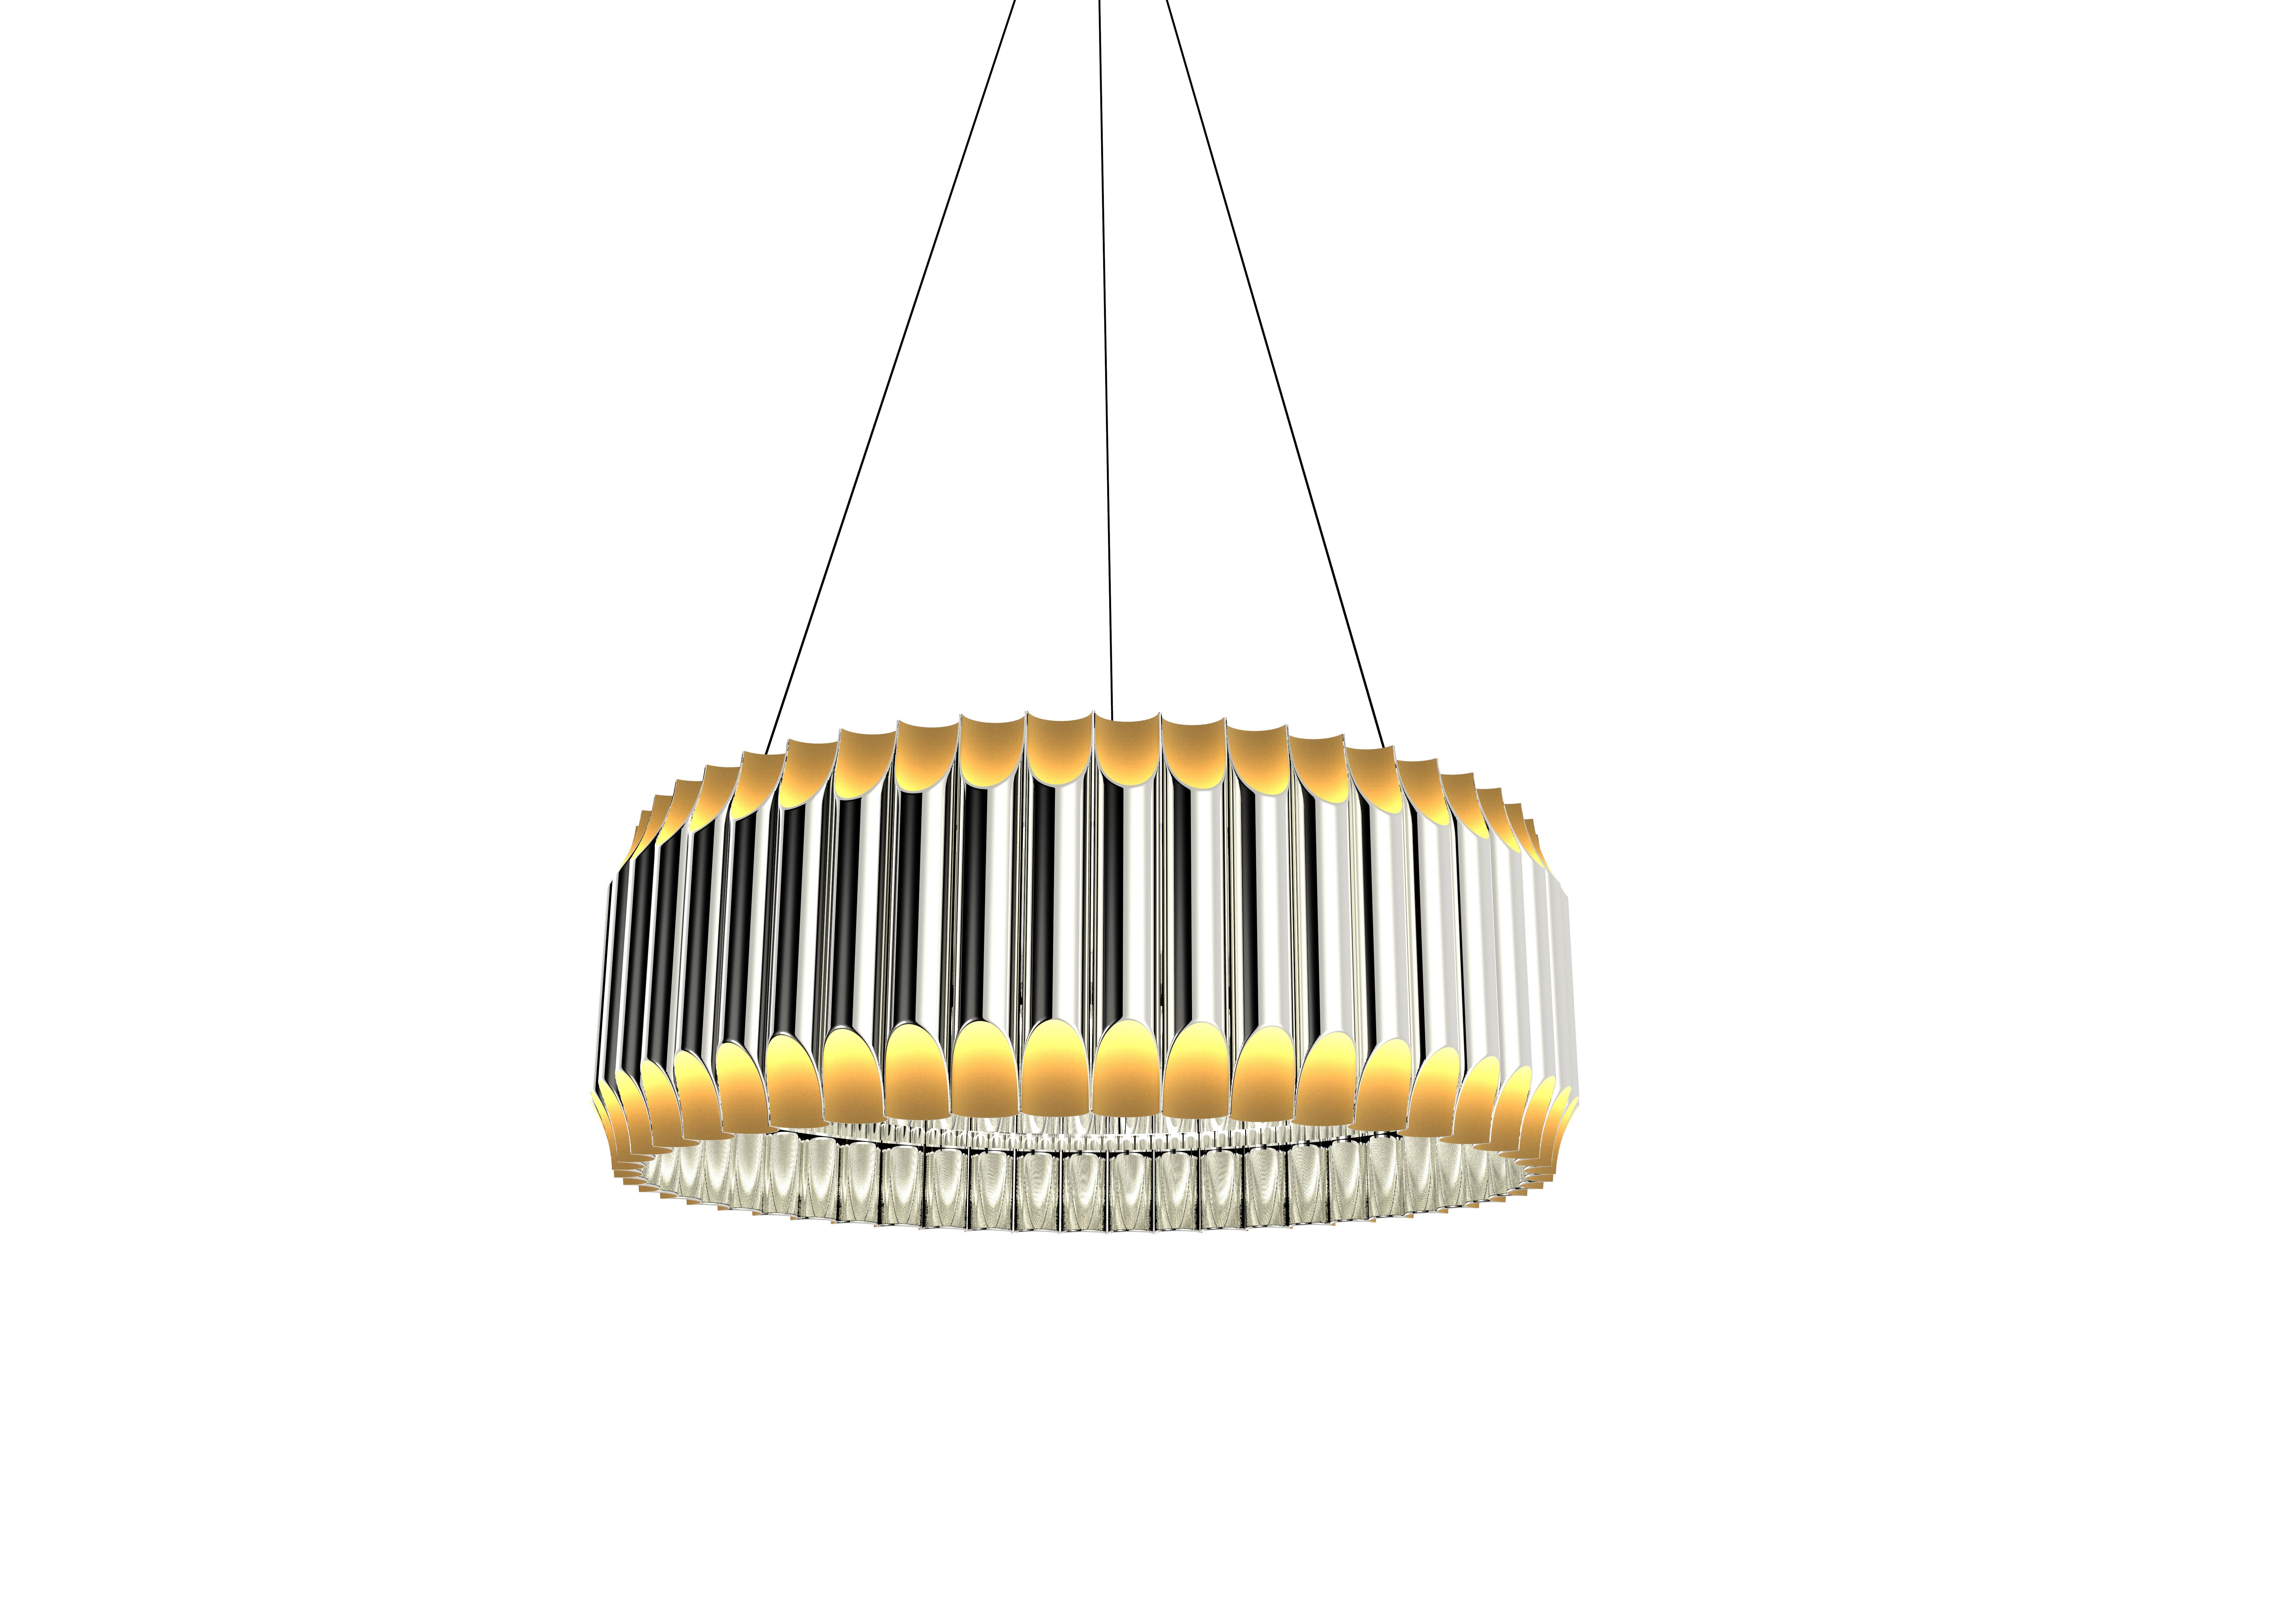 Galliano round chandelier is a Mid-Century Modern light with a shape that was inspired by a pipe organ. With sculptural shapes and an extremely balanced design, this modern lighting design gets even more beautiful when you see the light being casted